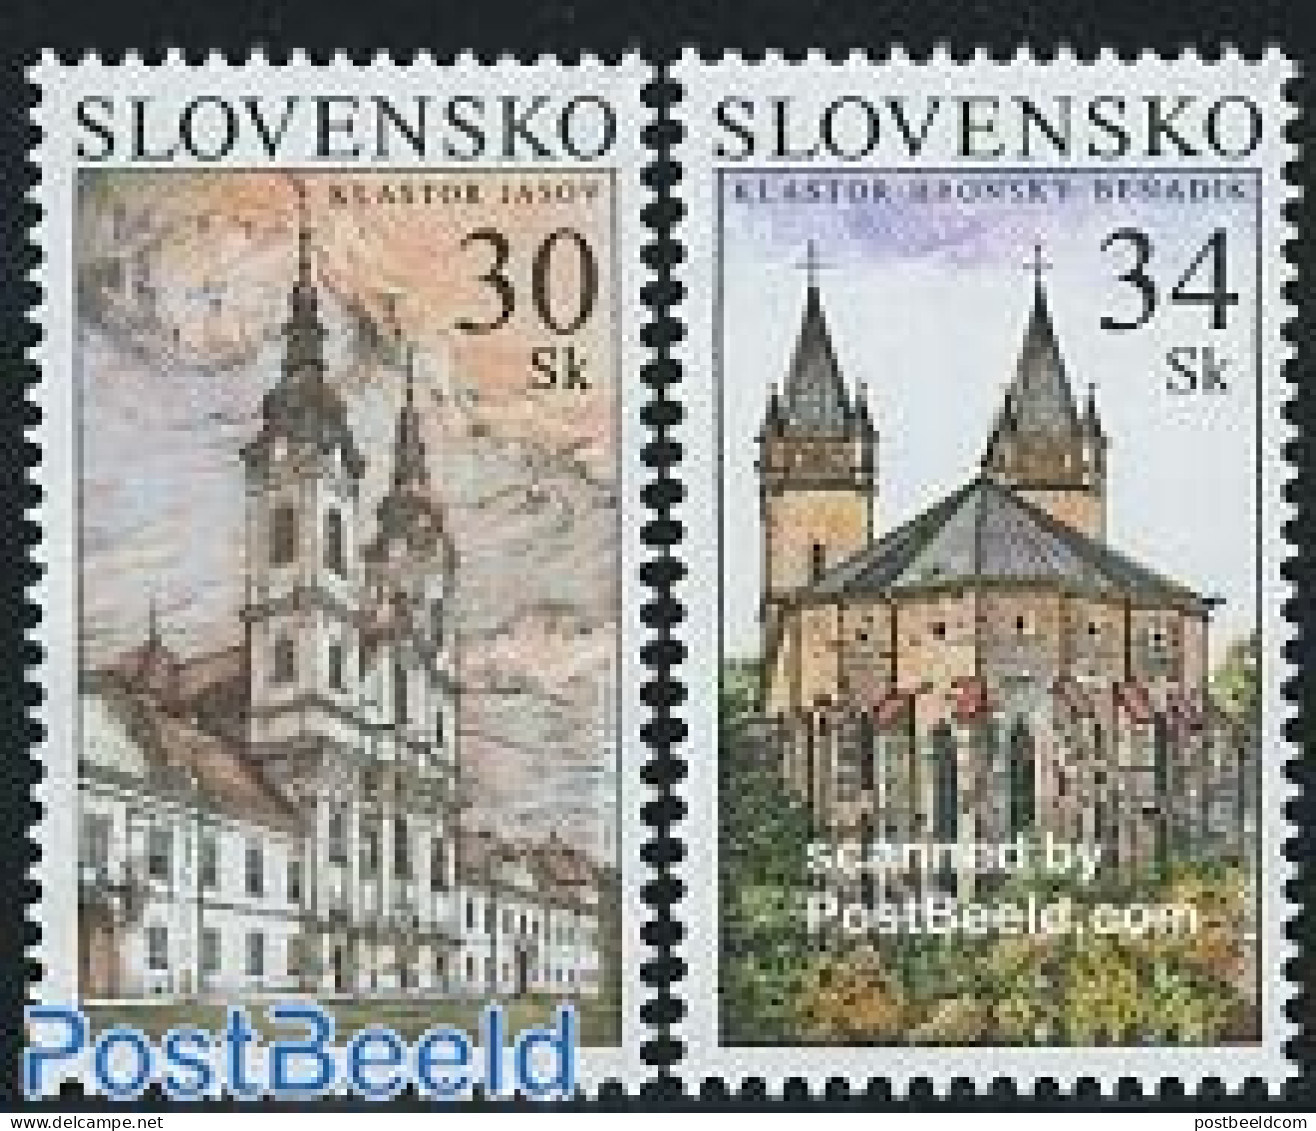 Slovakia 2007 Monasteries 2v, Mint NH, Religion - Churches, Temples, Mosques, Synagogues - Cloisters & Abbeys - Neufs